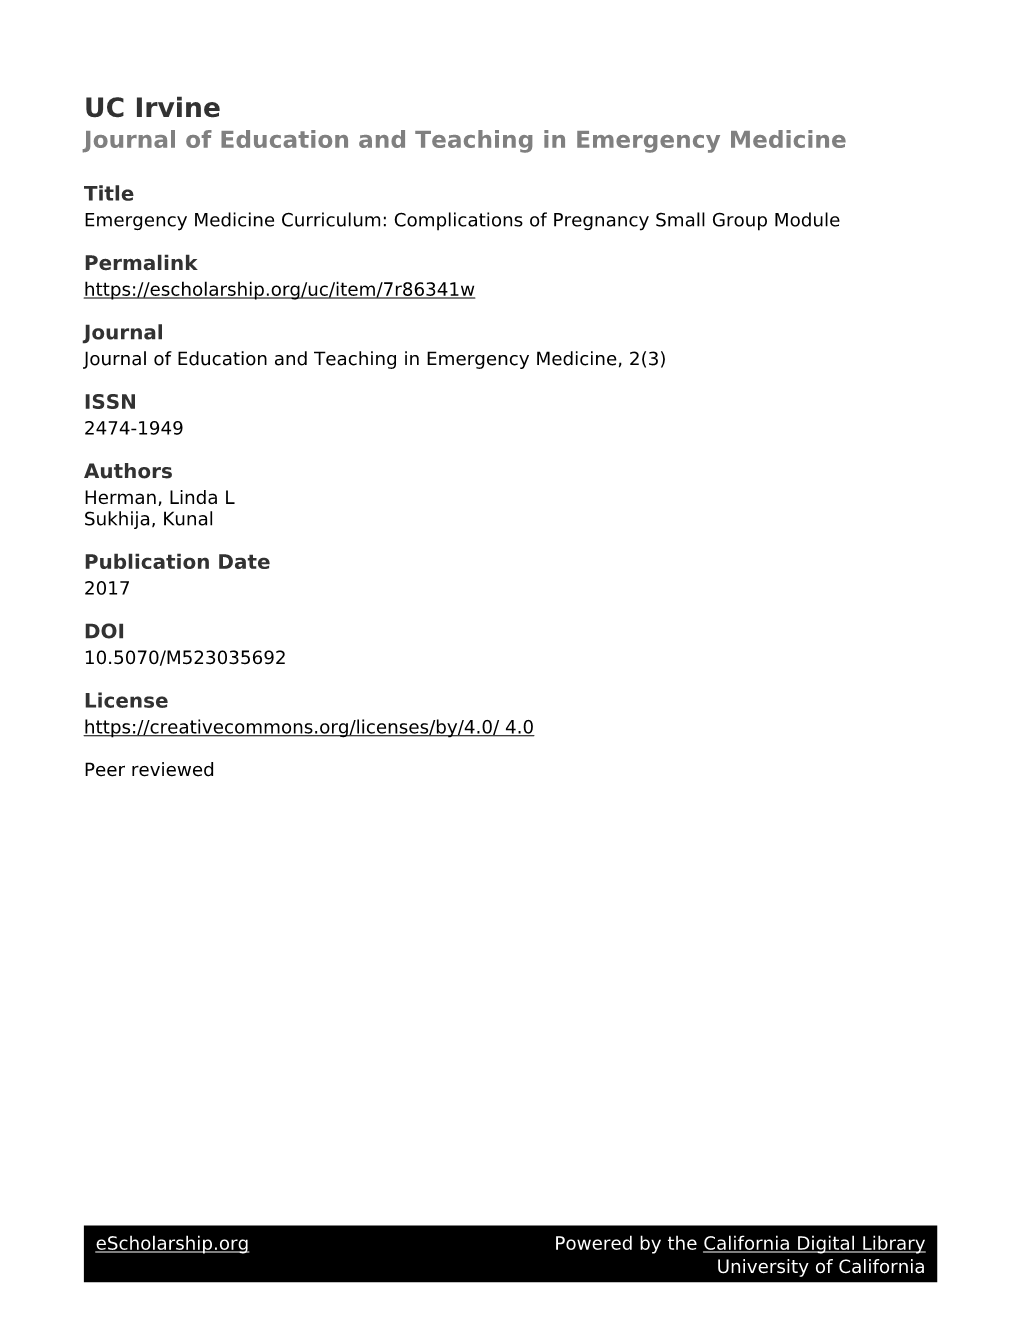 UC Irvine Journal of Education and Teaching in Emergency Medicine